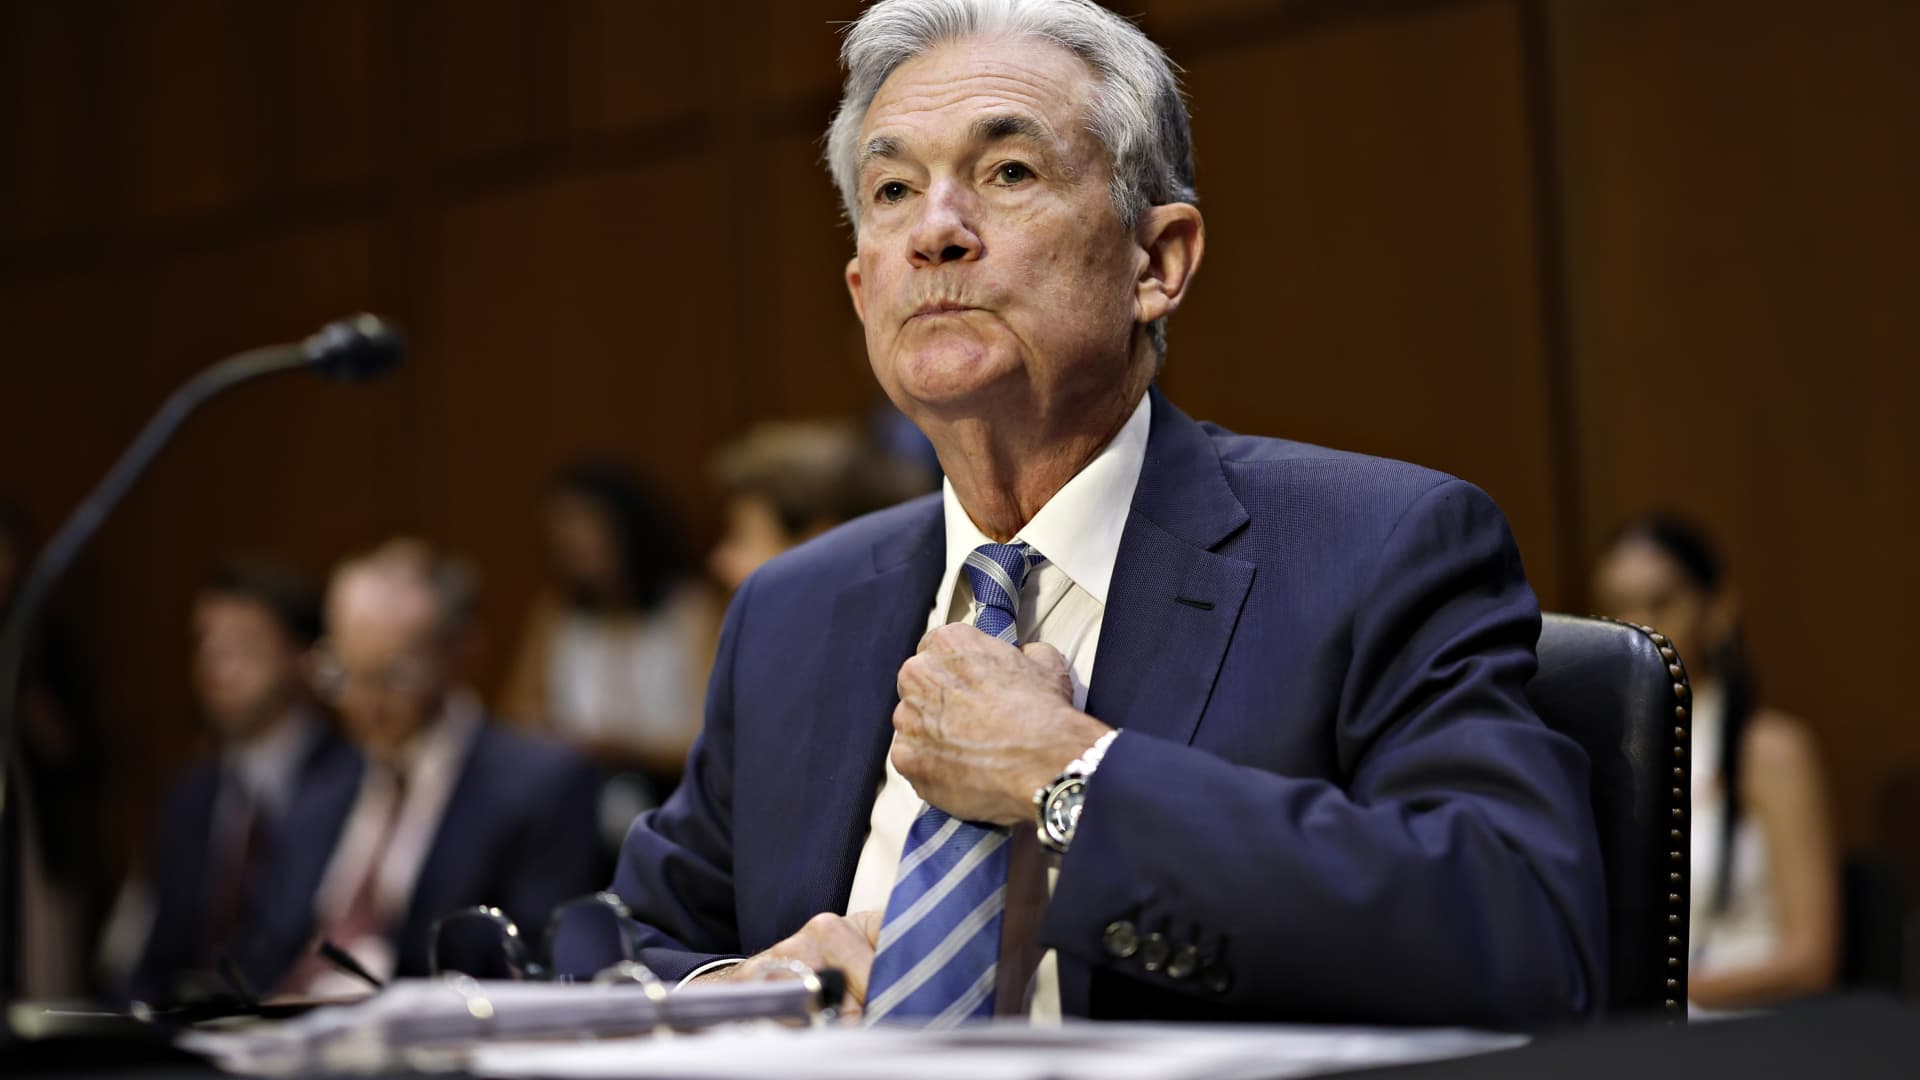 Powell tells Congress the Fed is ‘strongly committed’ on inflation, notes recession is a ‘probability’